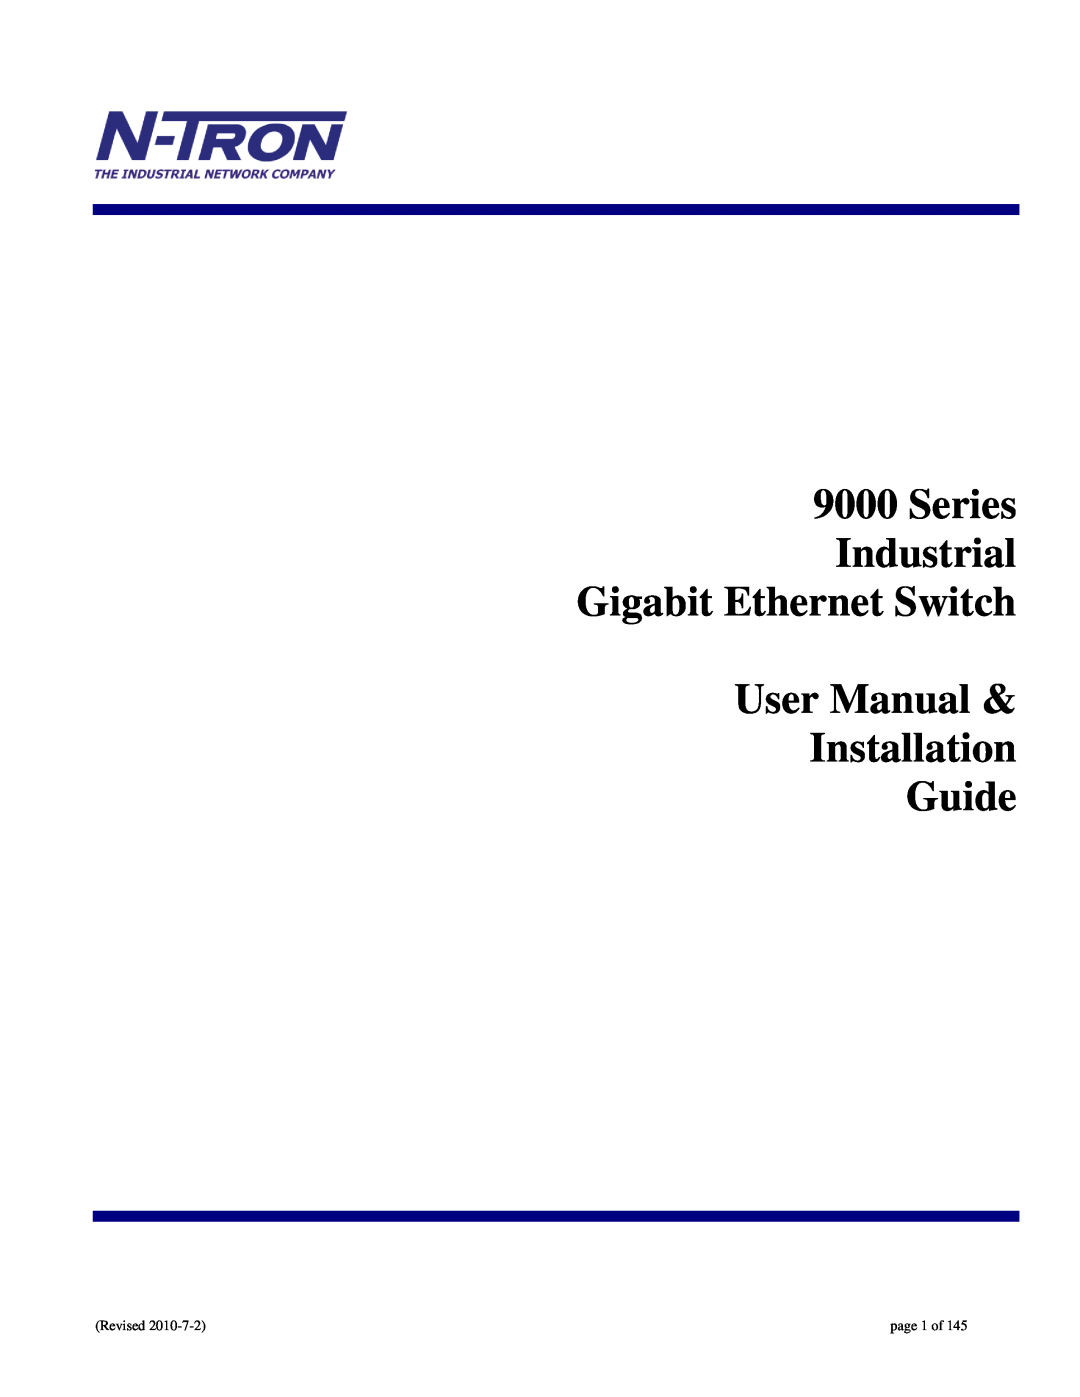 N-Tron 9000 user manual Series Industrial Gigabit Ethernet Switch User Manual, Installation Guide, Revised 